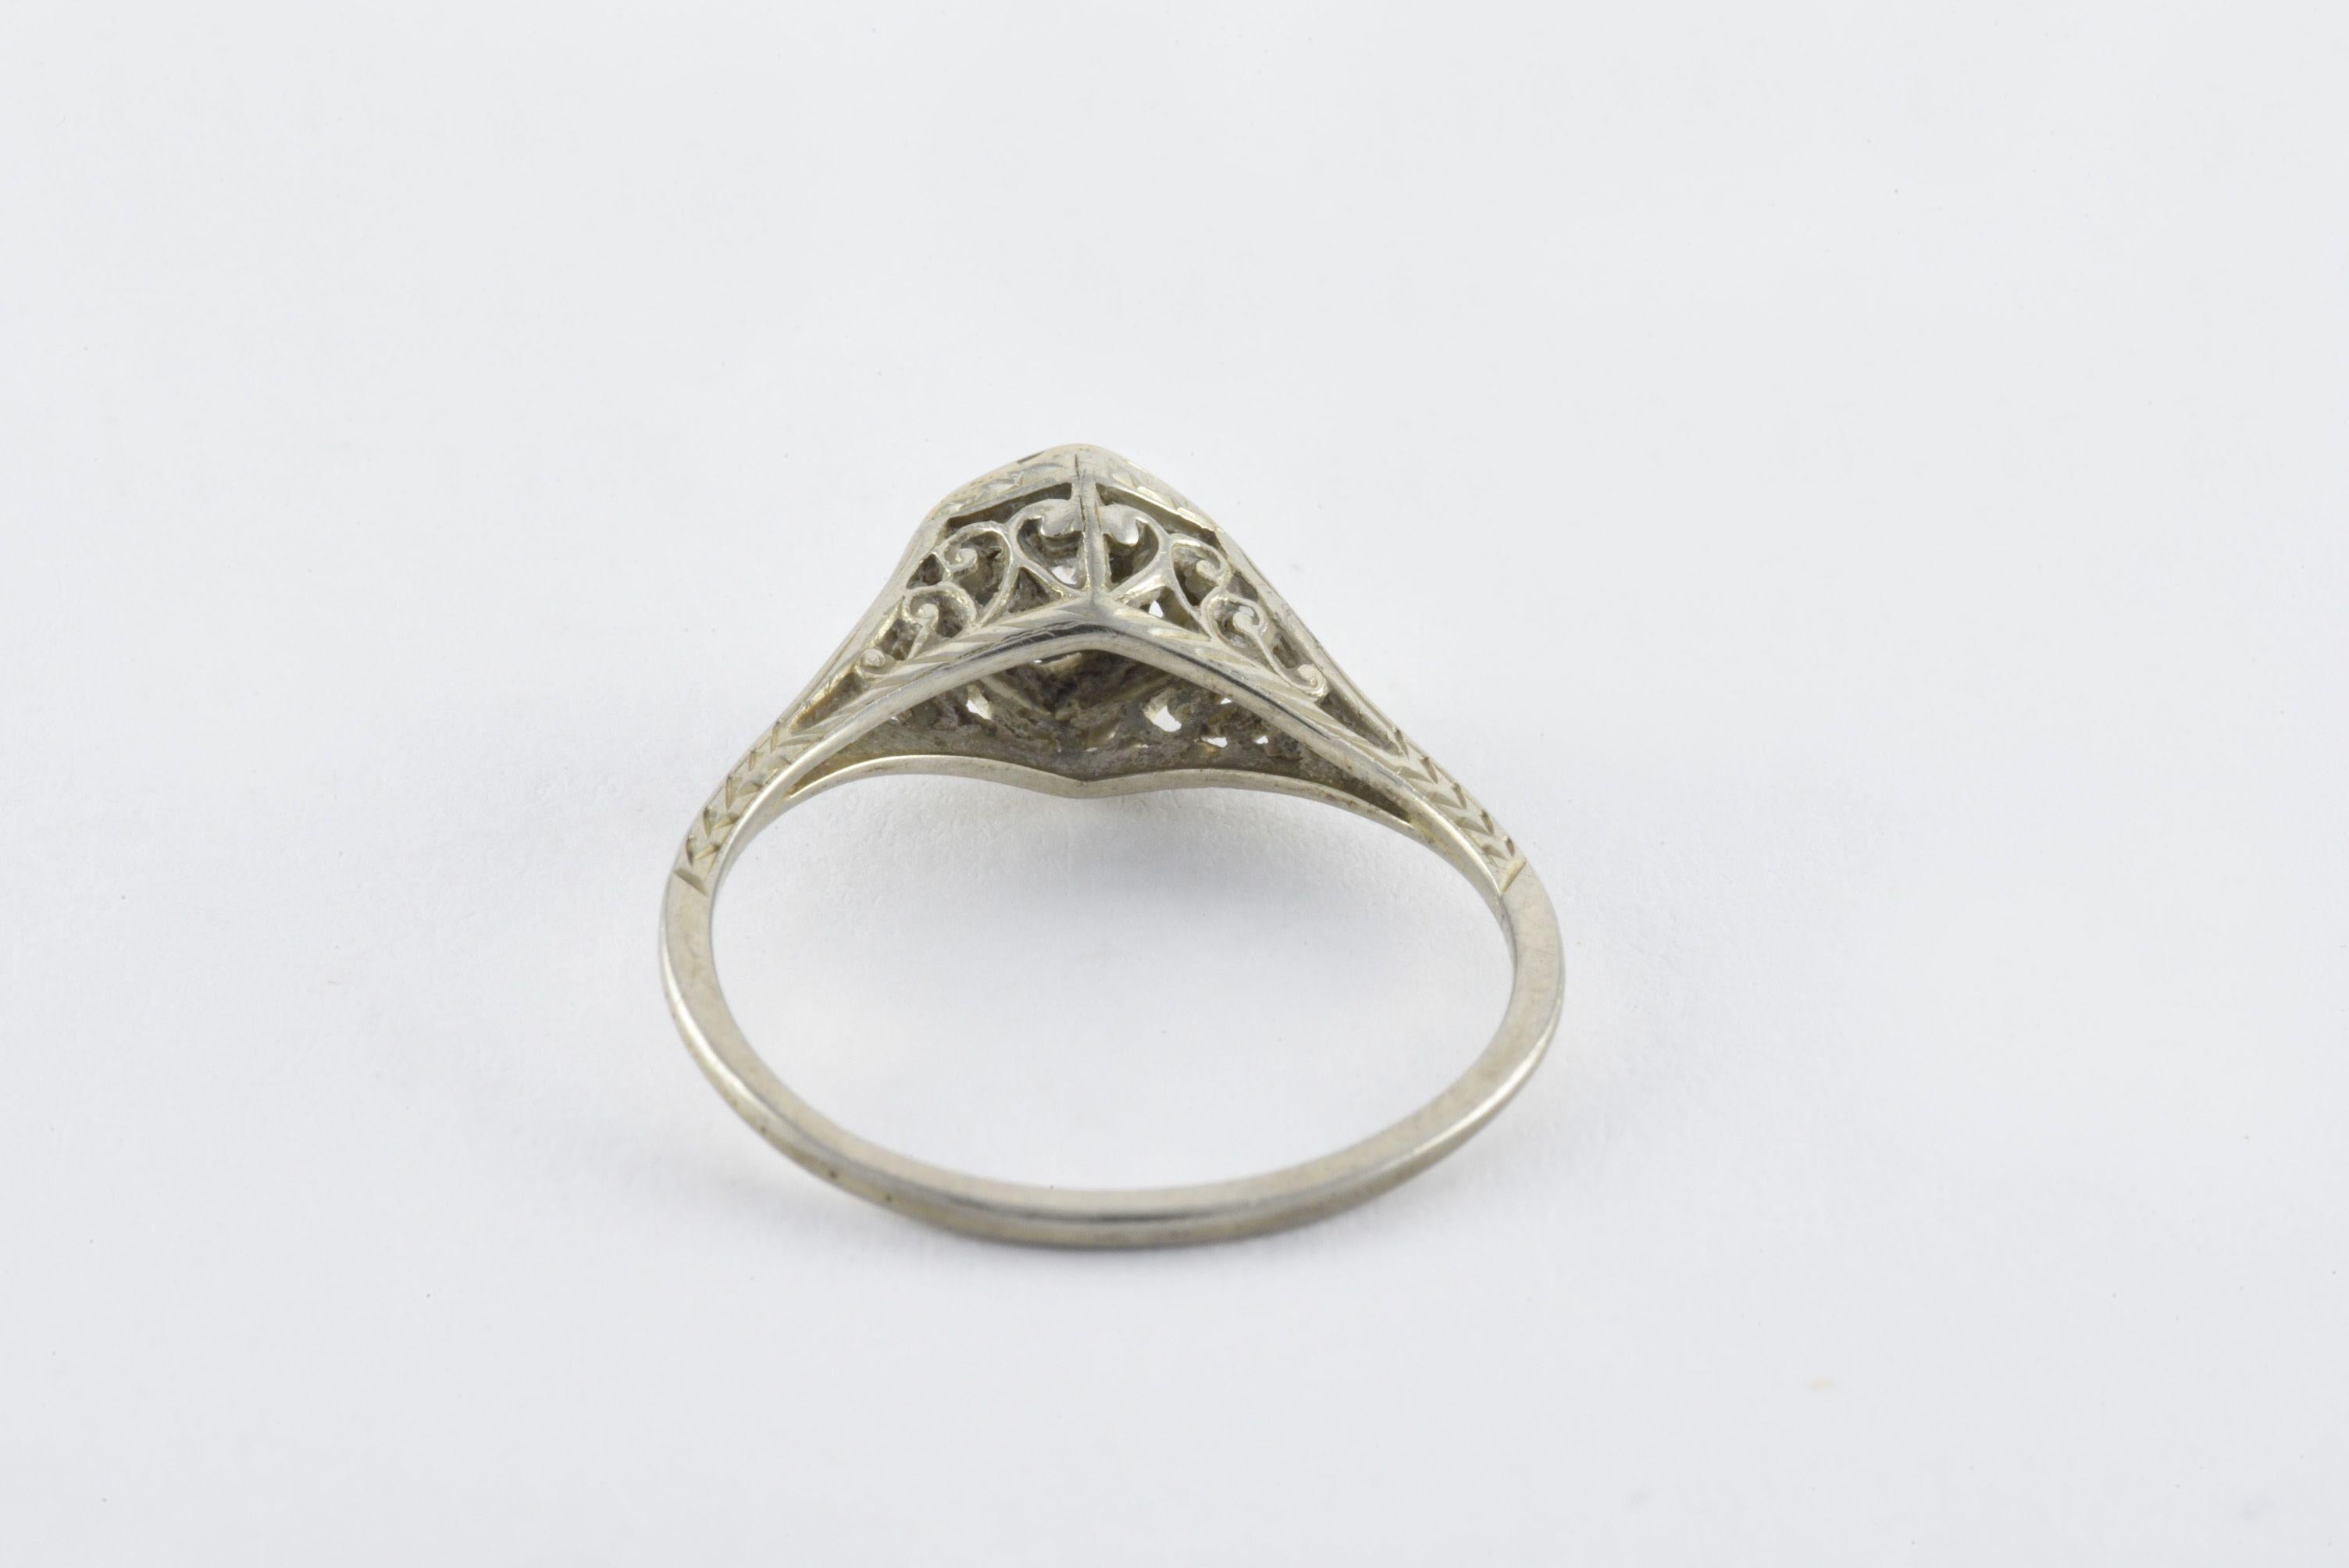 Old European Cut Art Deco Diamond and Filigree Ring For Sale